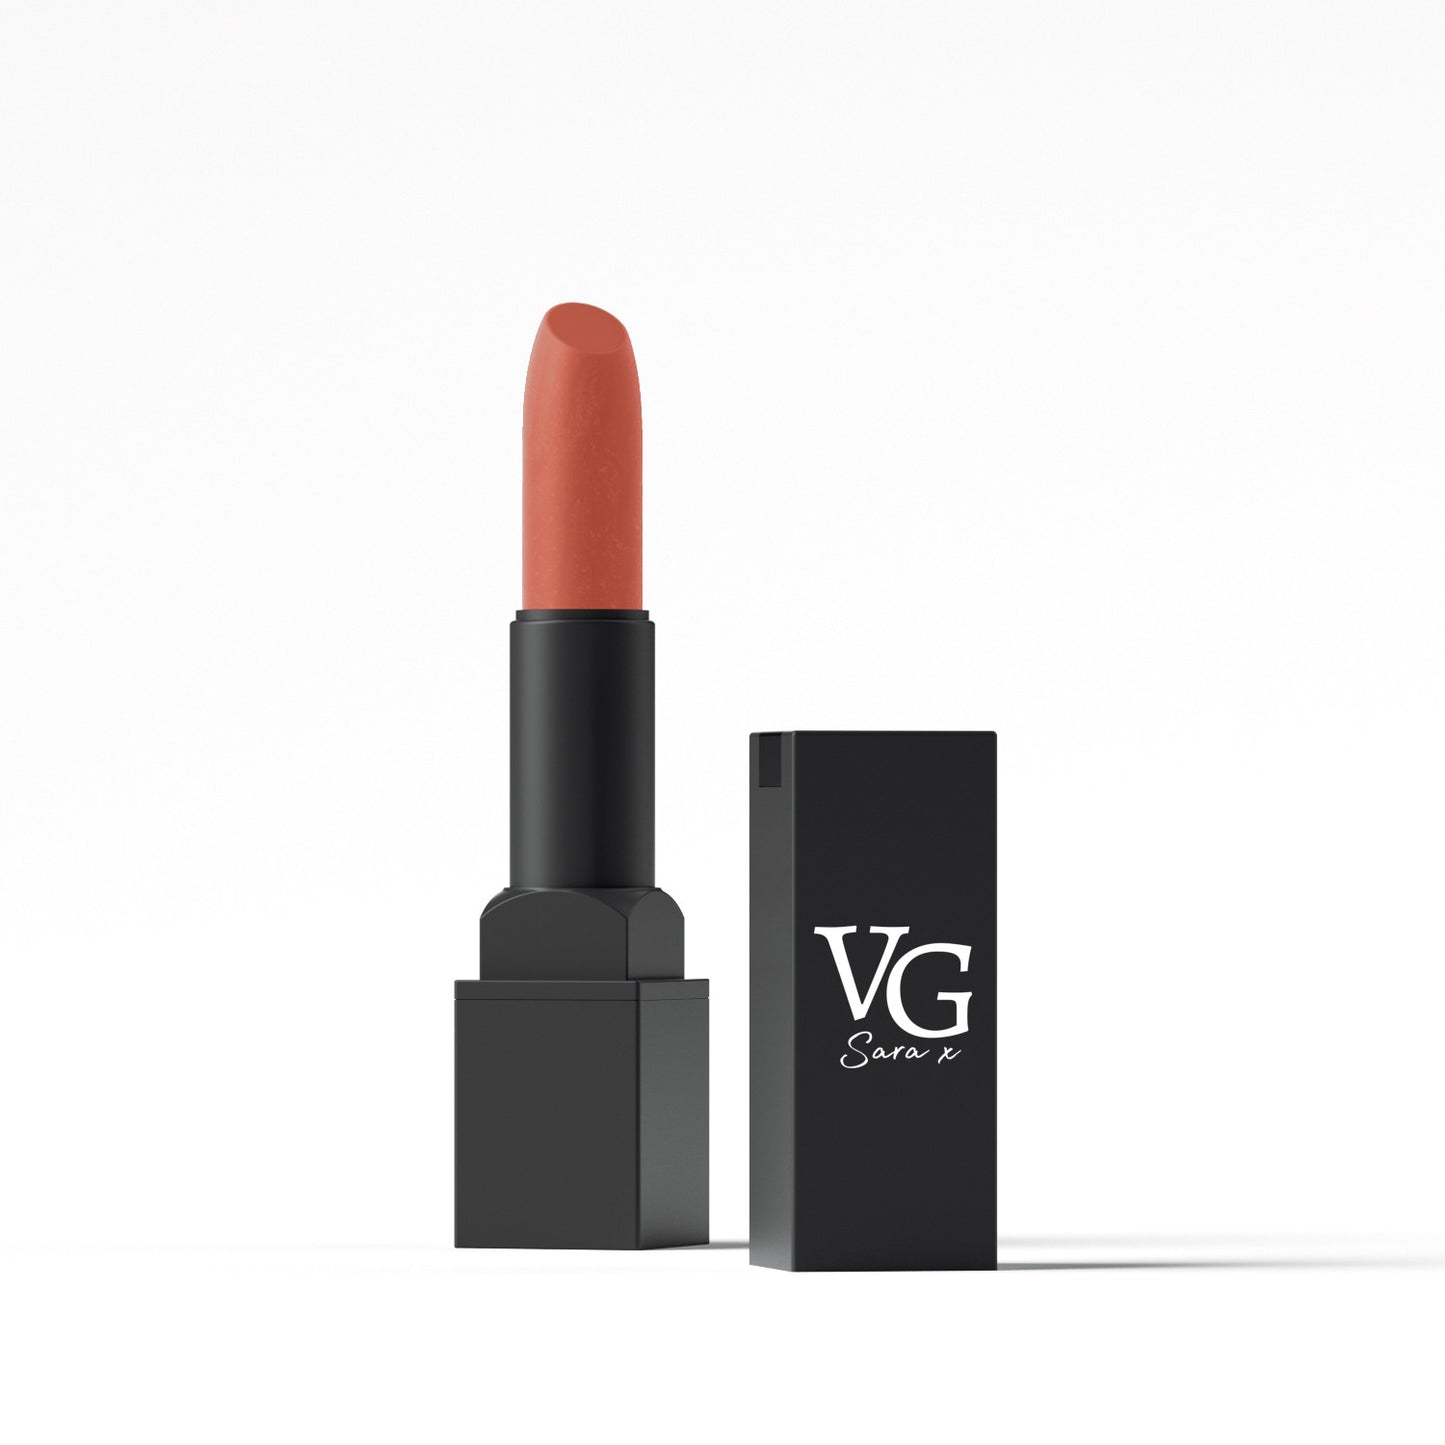 VG Cosmetics lipstick featuring the VG logo on the casing in a white background